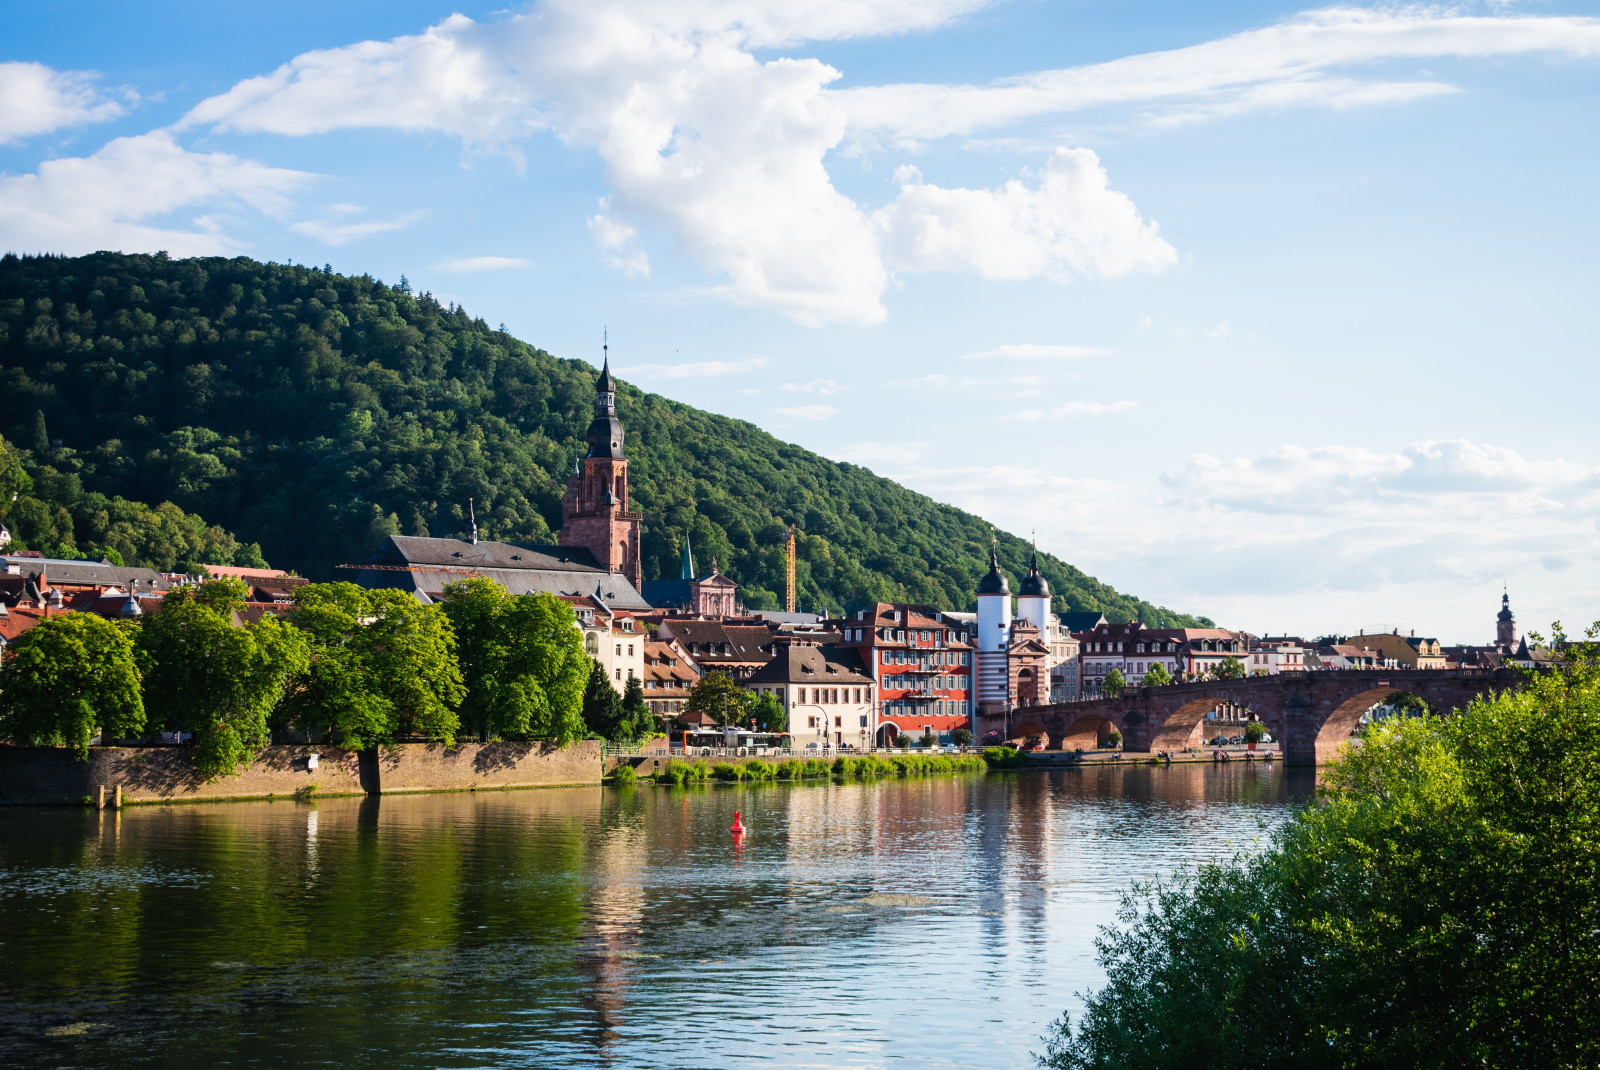 View of river and buildings in Heidelberg, Germany